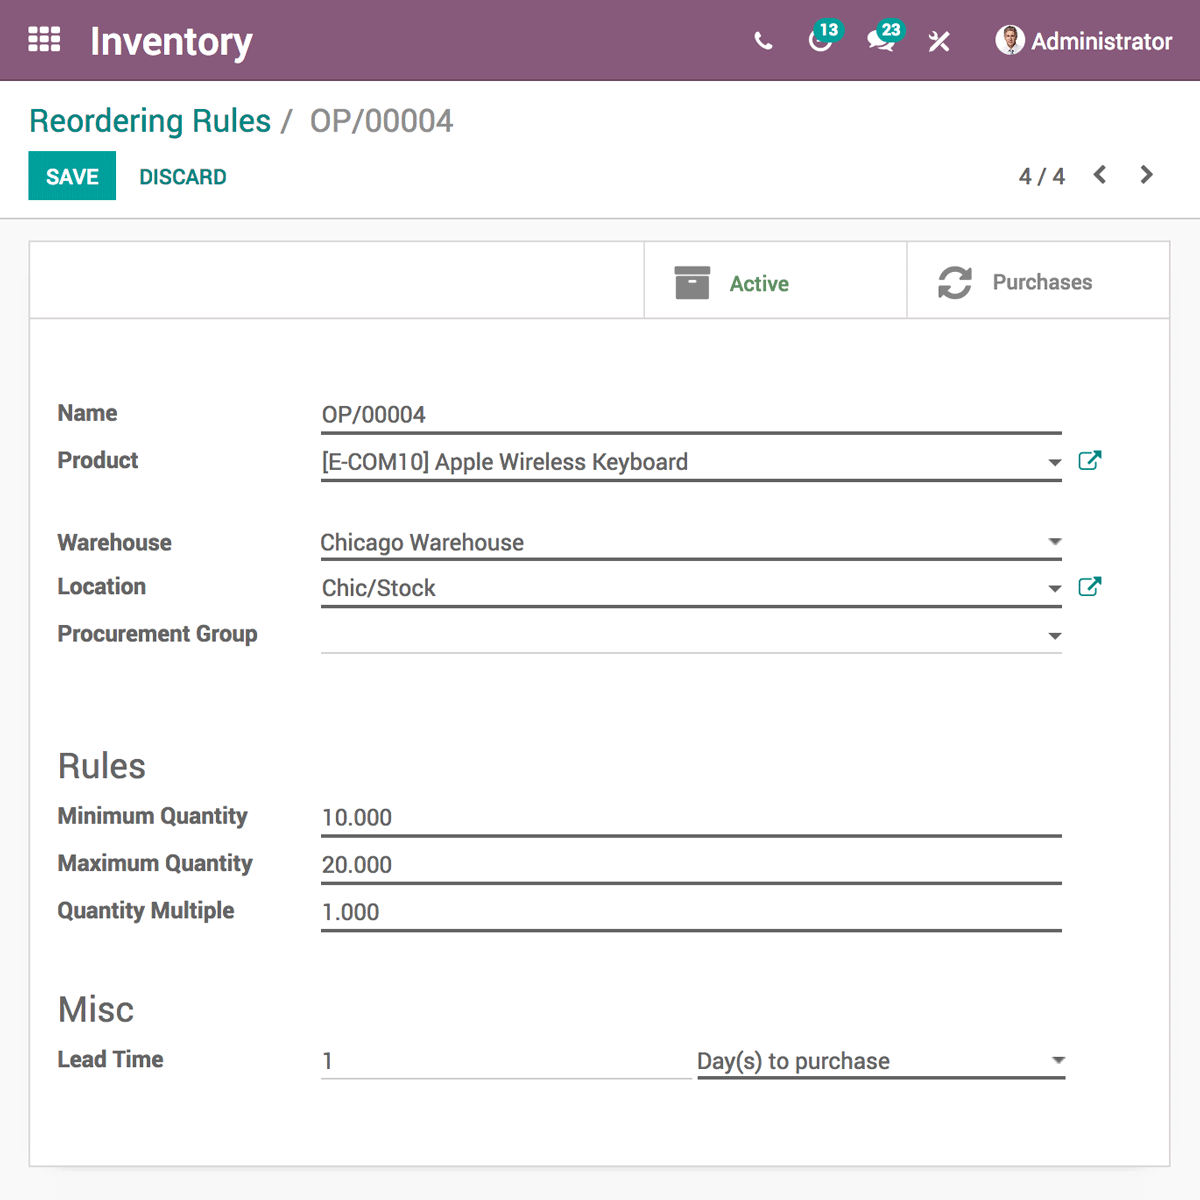 Odoo Inventory interface showing a reordering rule